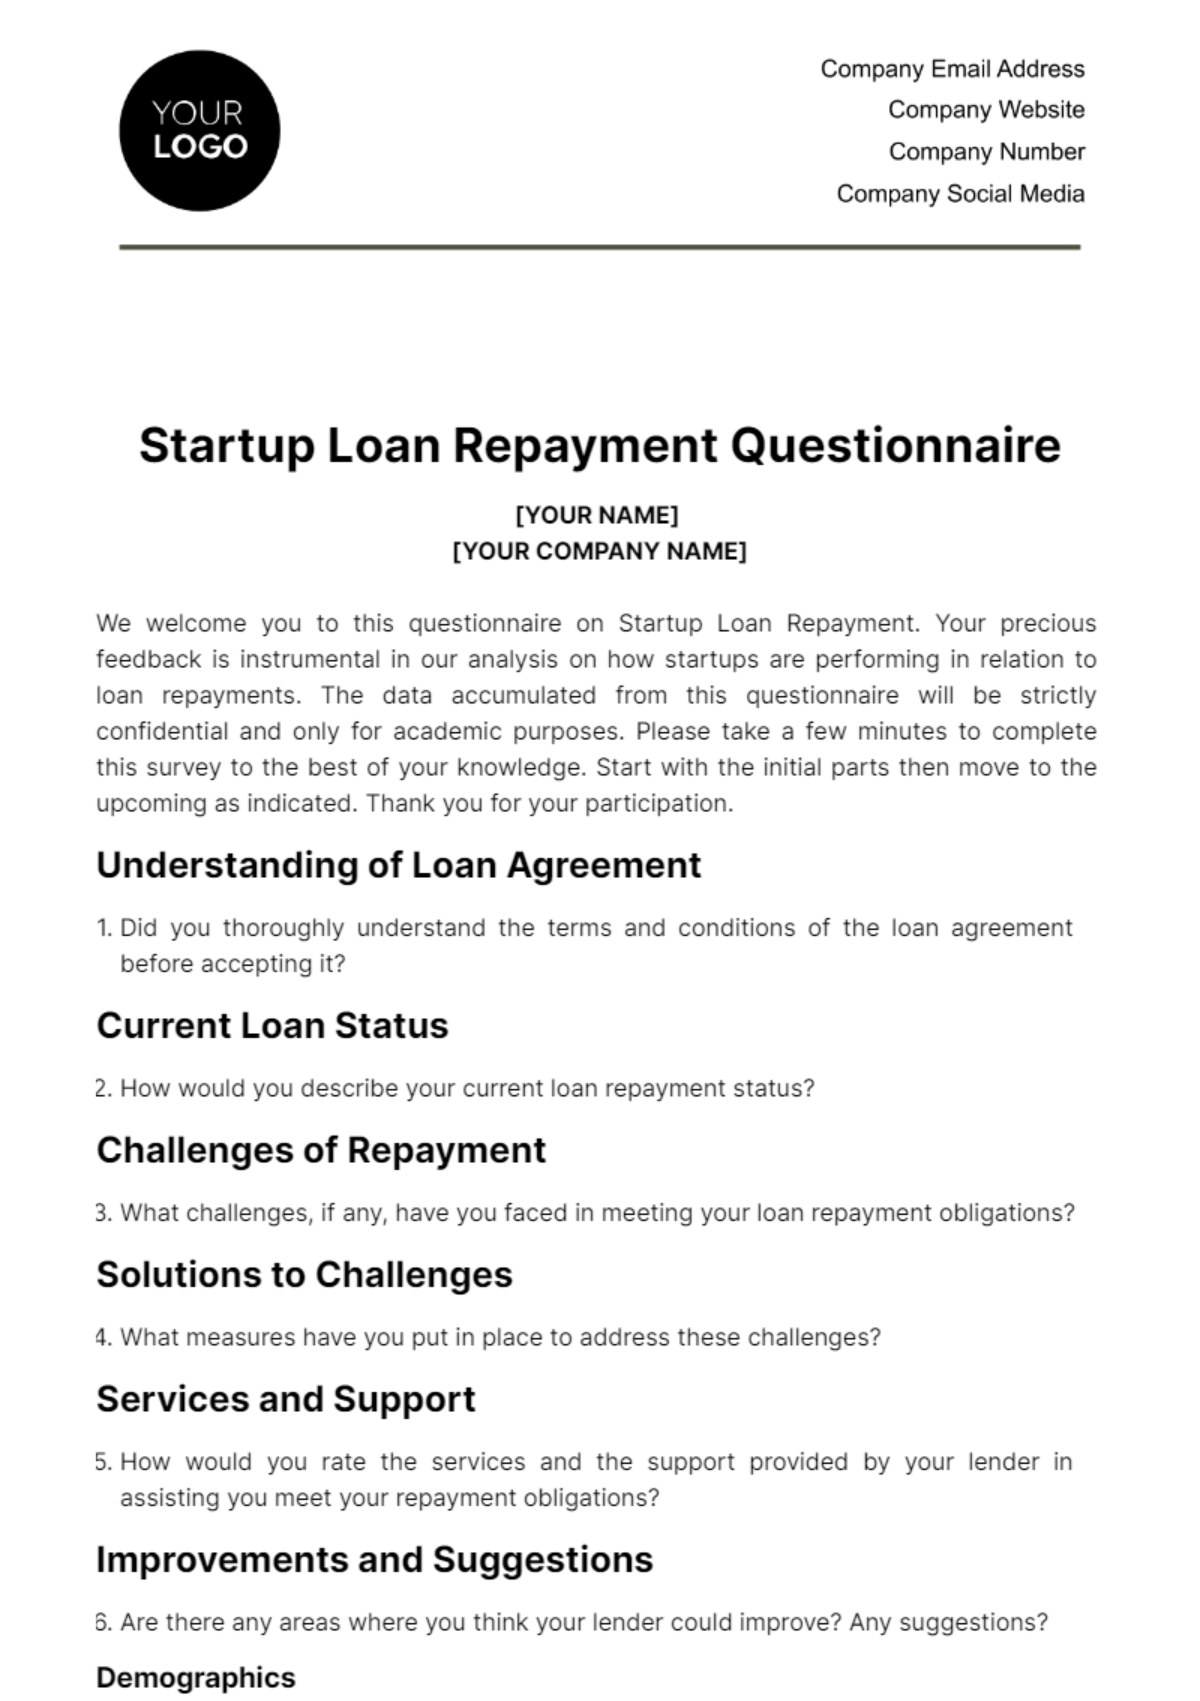 Free Startup Loan Repayment Questionnaire Template